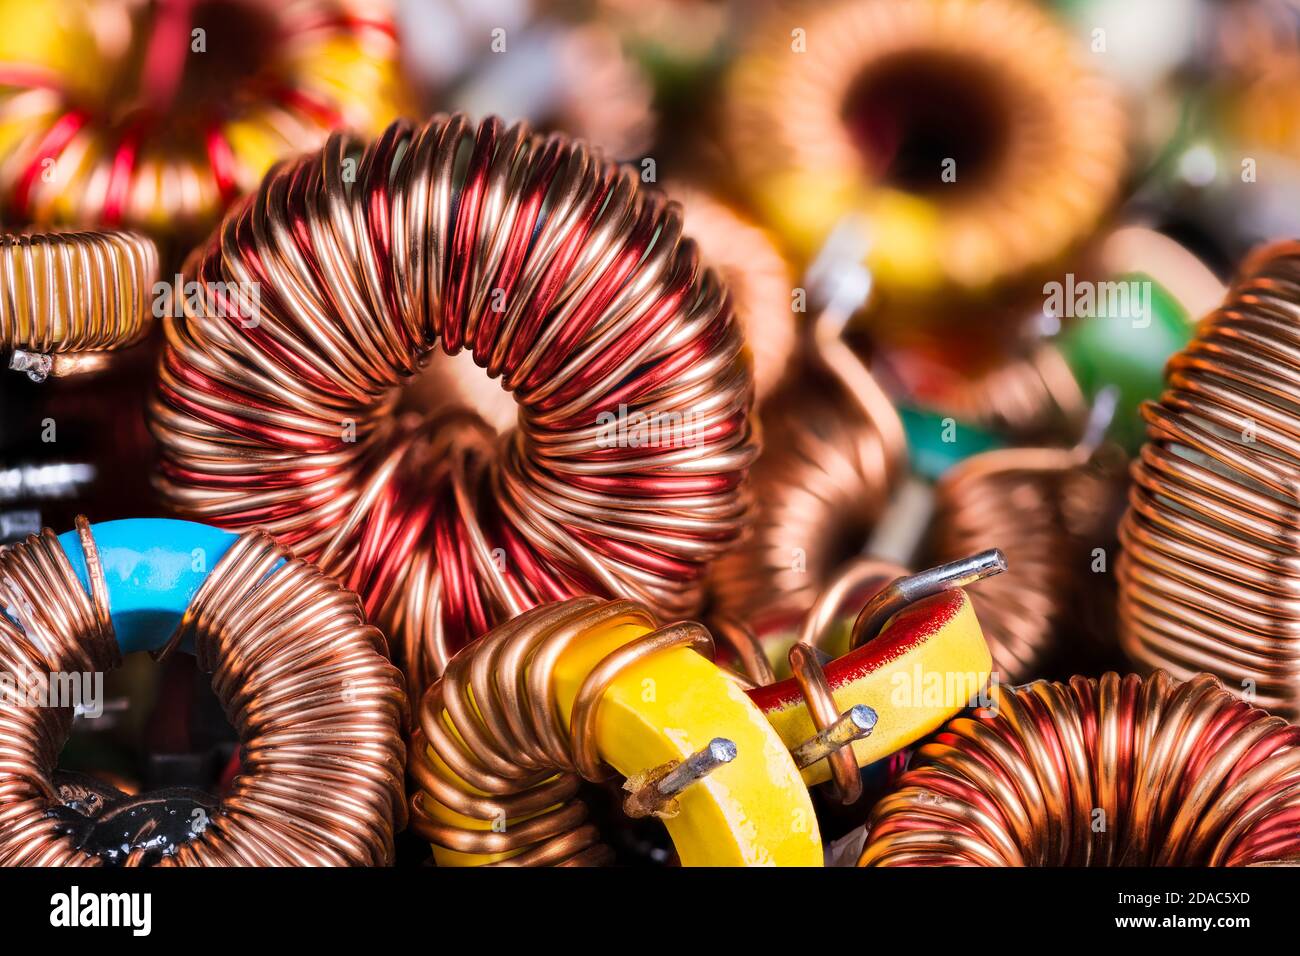 Toroidal electronic inductors on heap. Electrotechnical background. Closeup of beautiful induction coils. Copper wire winding on magnetic ferrite core. Stock Photo